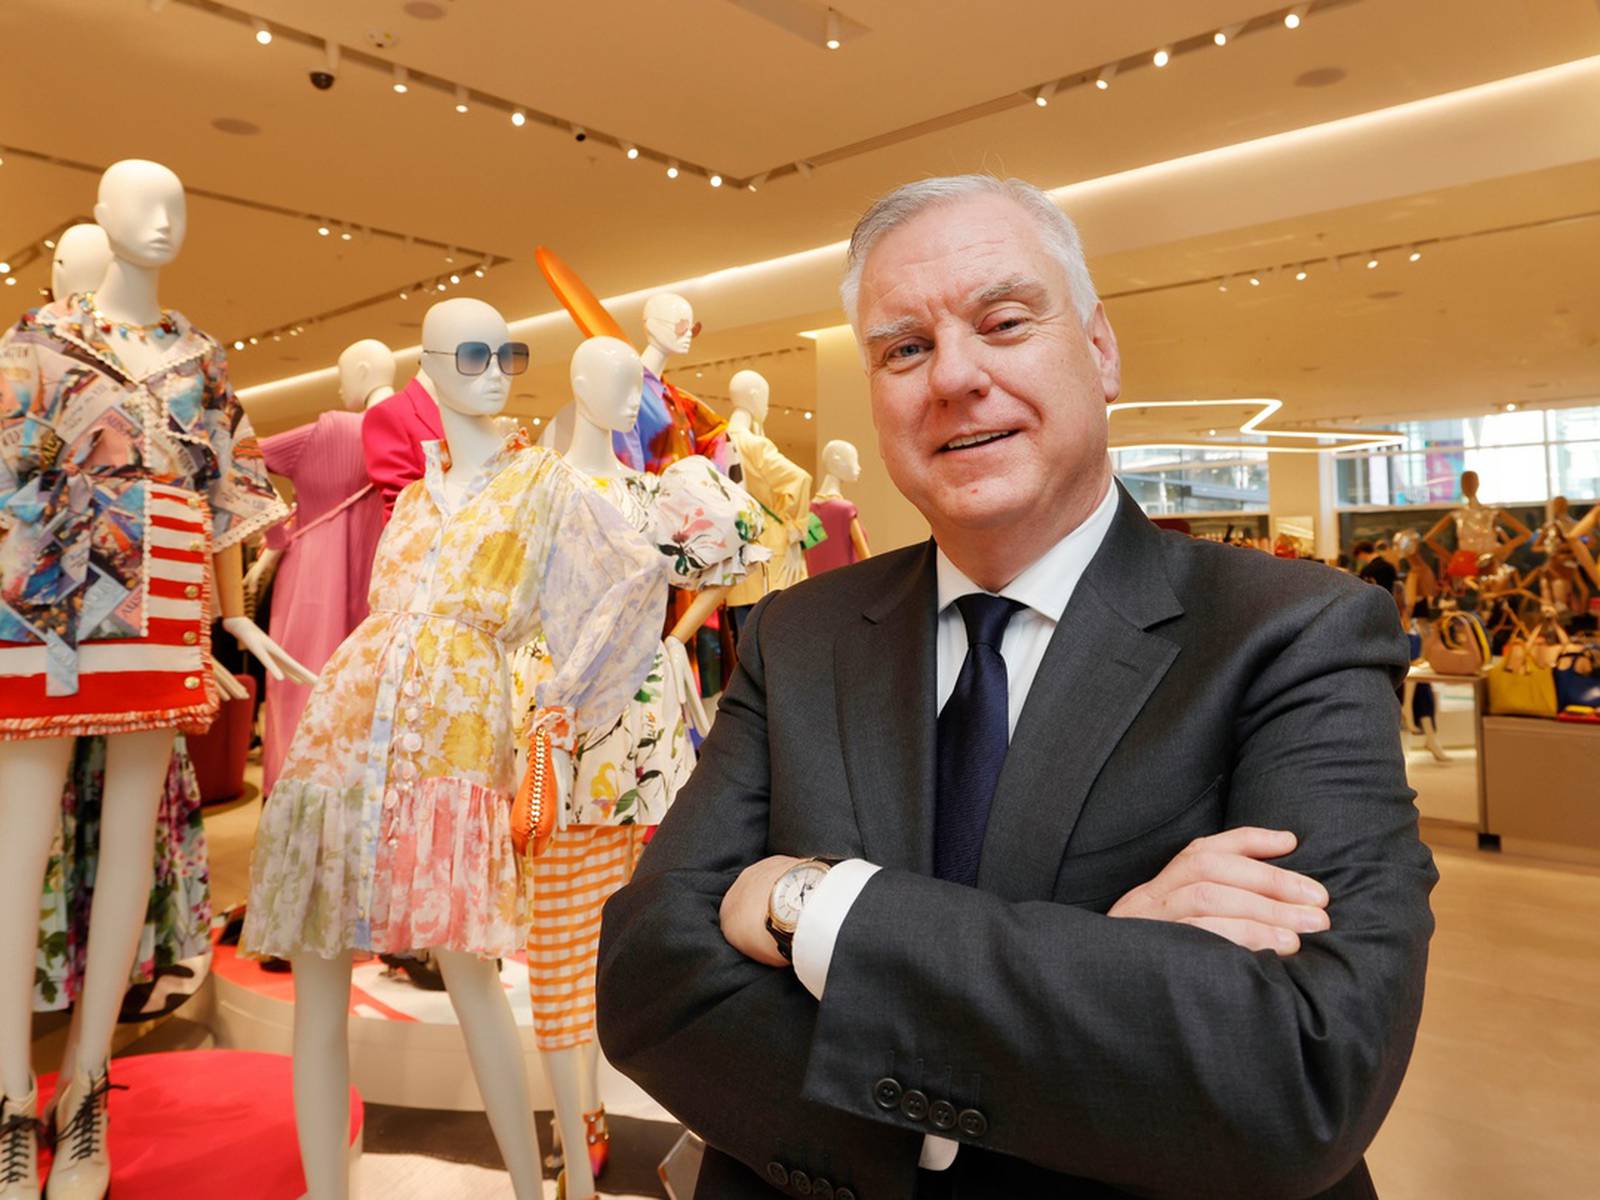 Brown Thomas opens €12m Dundrum shop